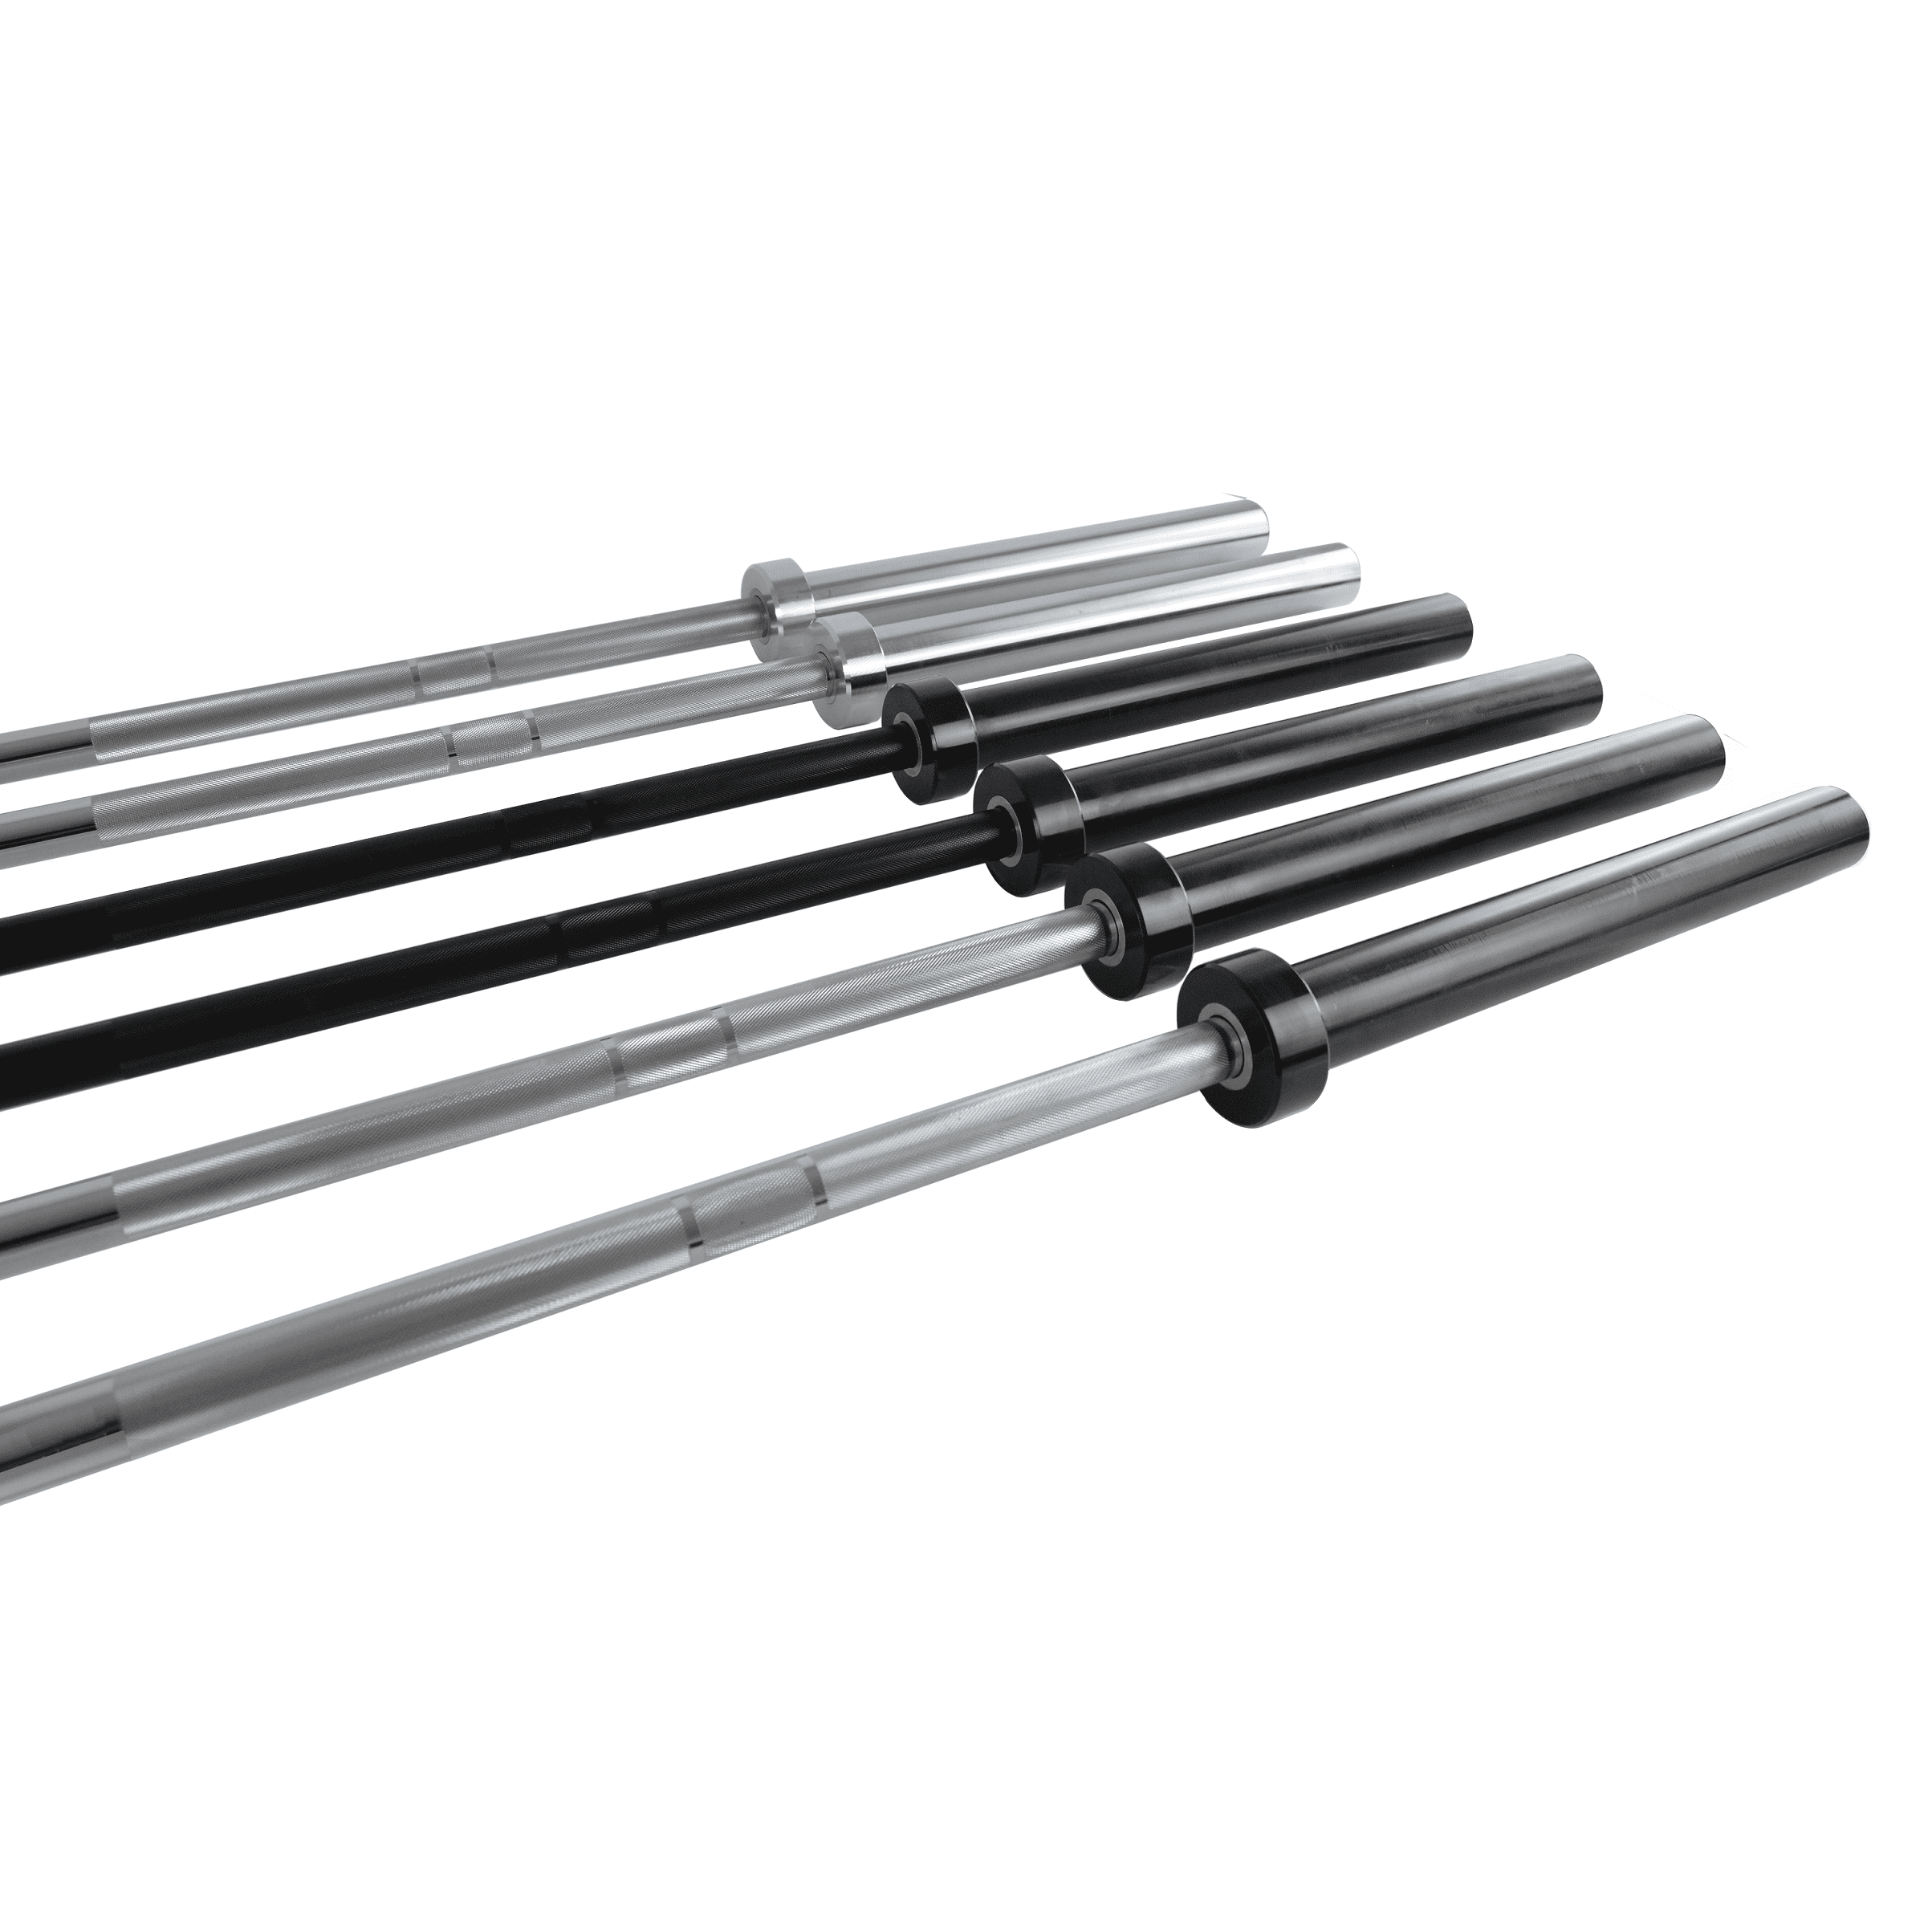 2020 new style high quality  Weight Lifting 2.2M Barbell bar  20kg